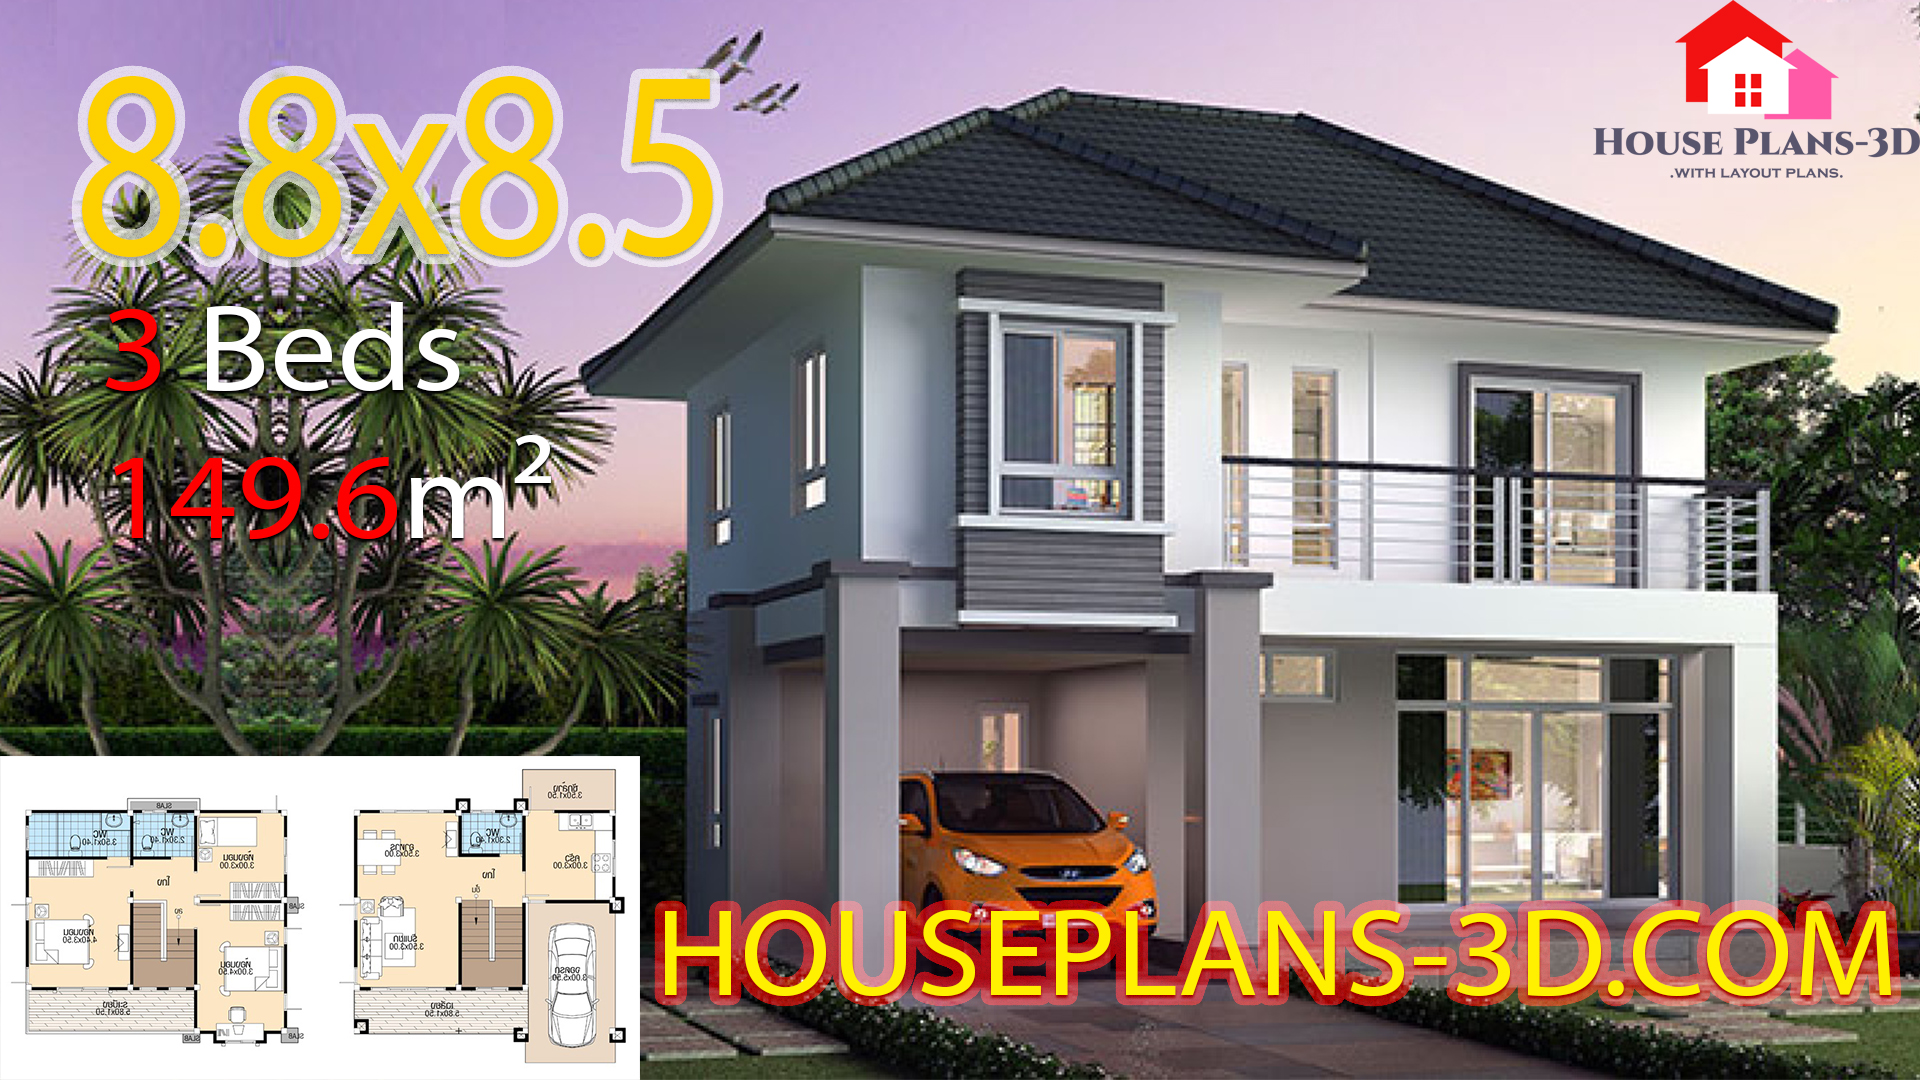 House design 8.8×8.5 with 3 Bedrooms